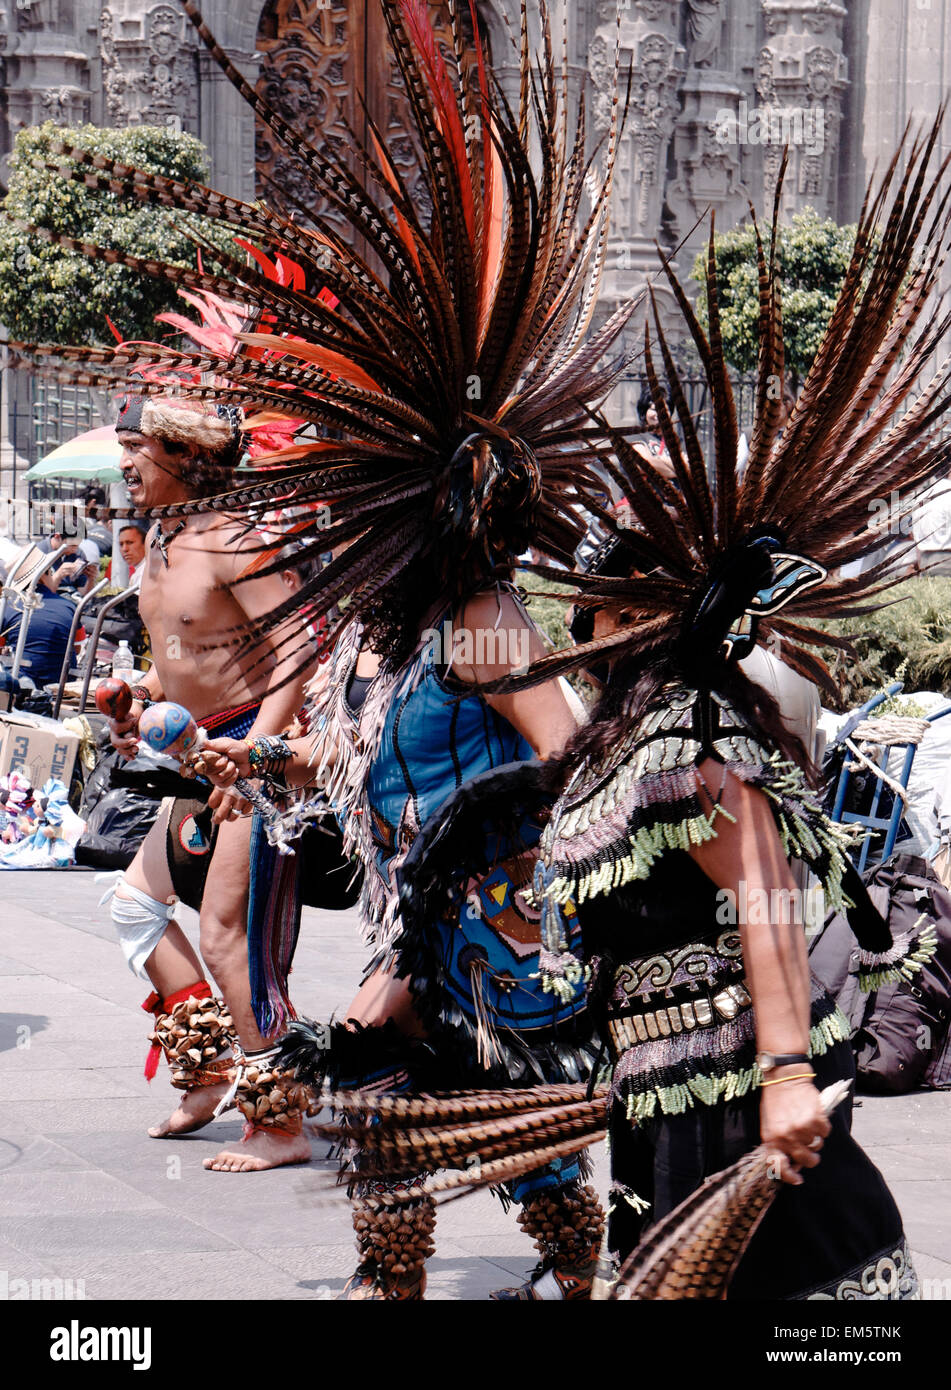 Aztec dancers accuse U.S. agency of confiscating their traditional feathers